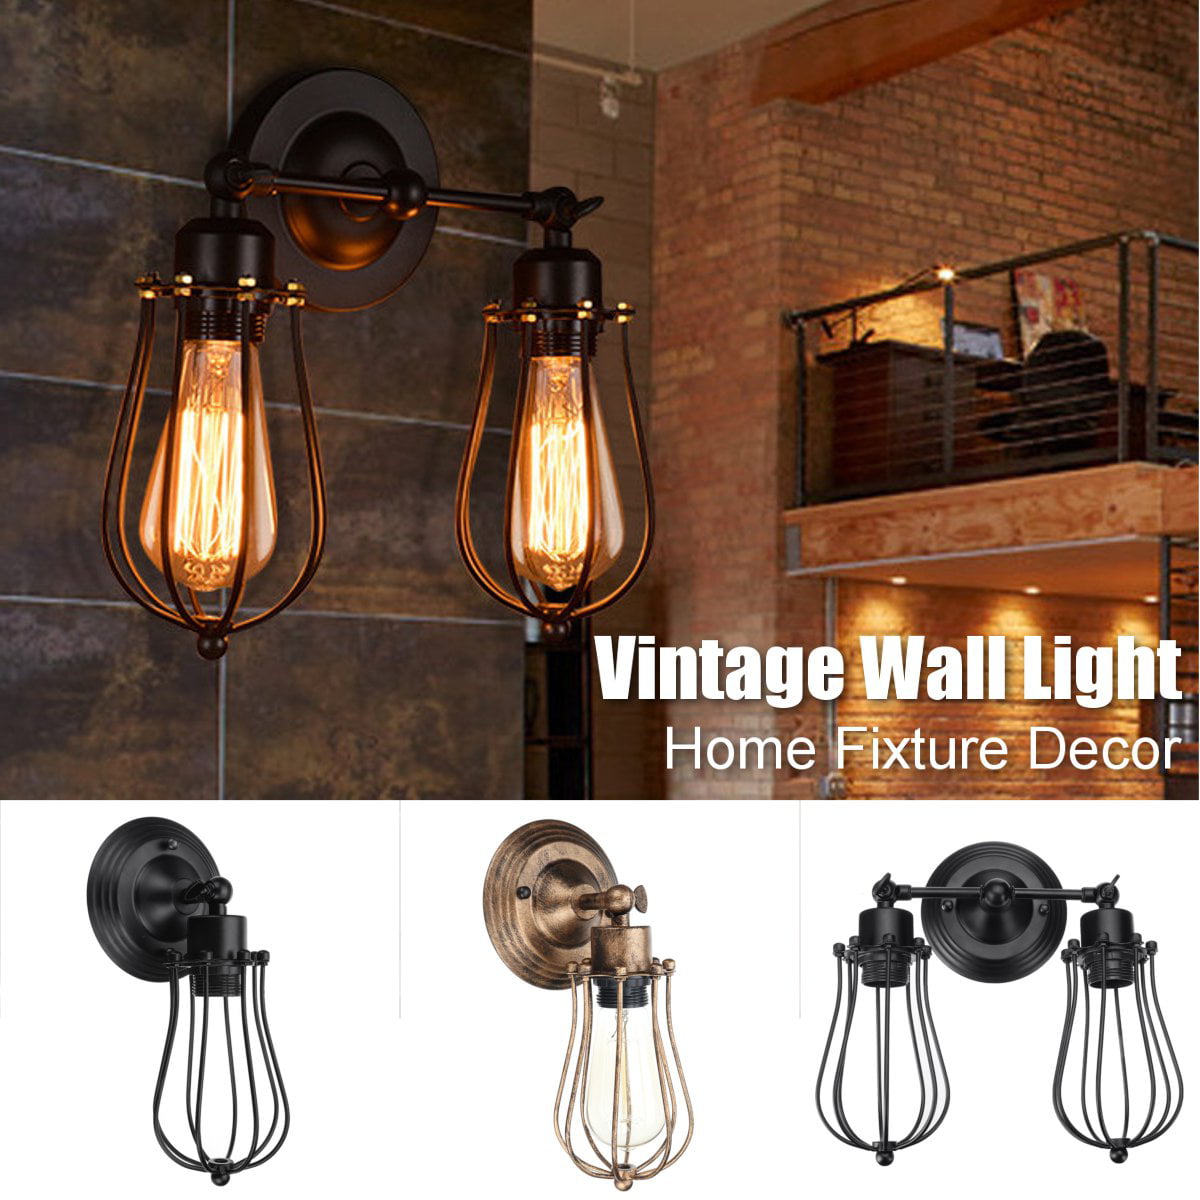 Industrial Vintage Wall Light Sconce Cage Ceiling Lamp Retro Lamp Shade LED E27 